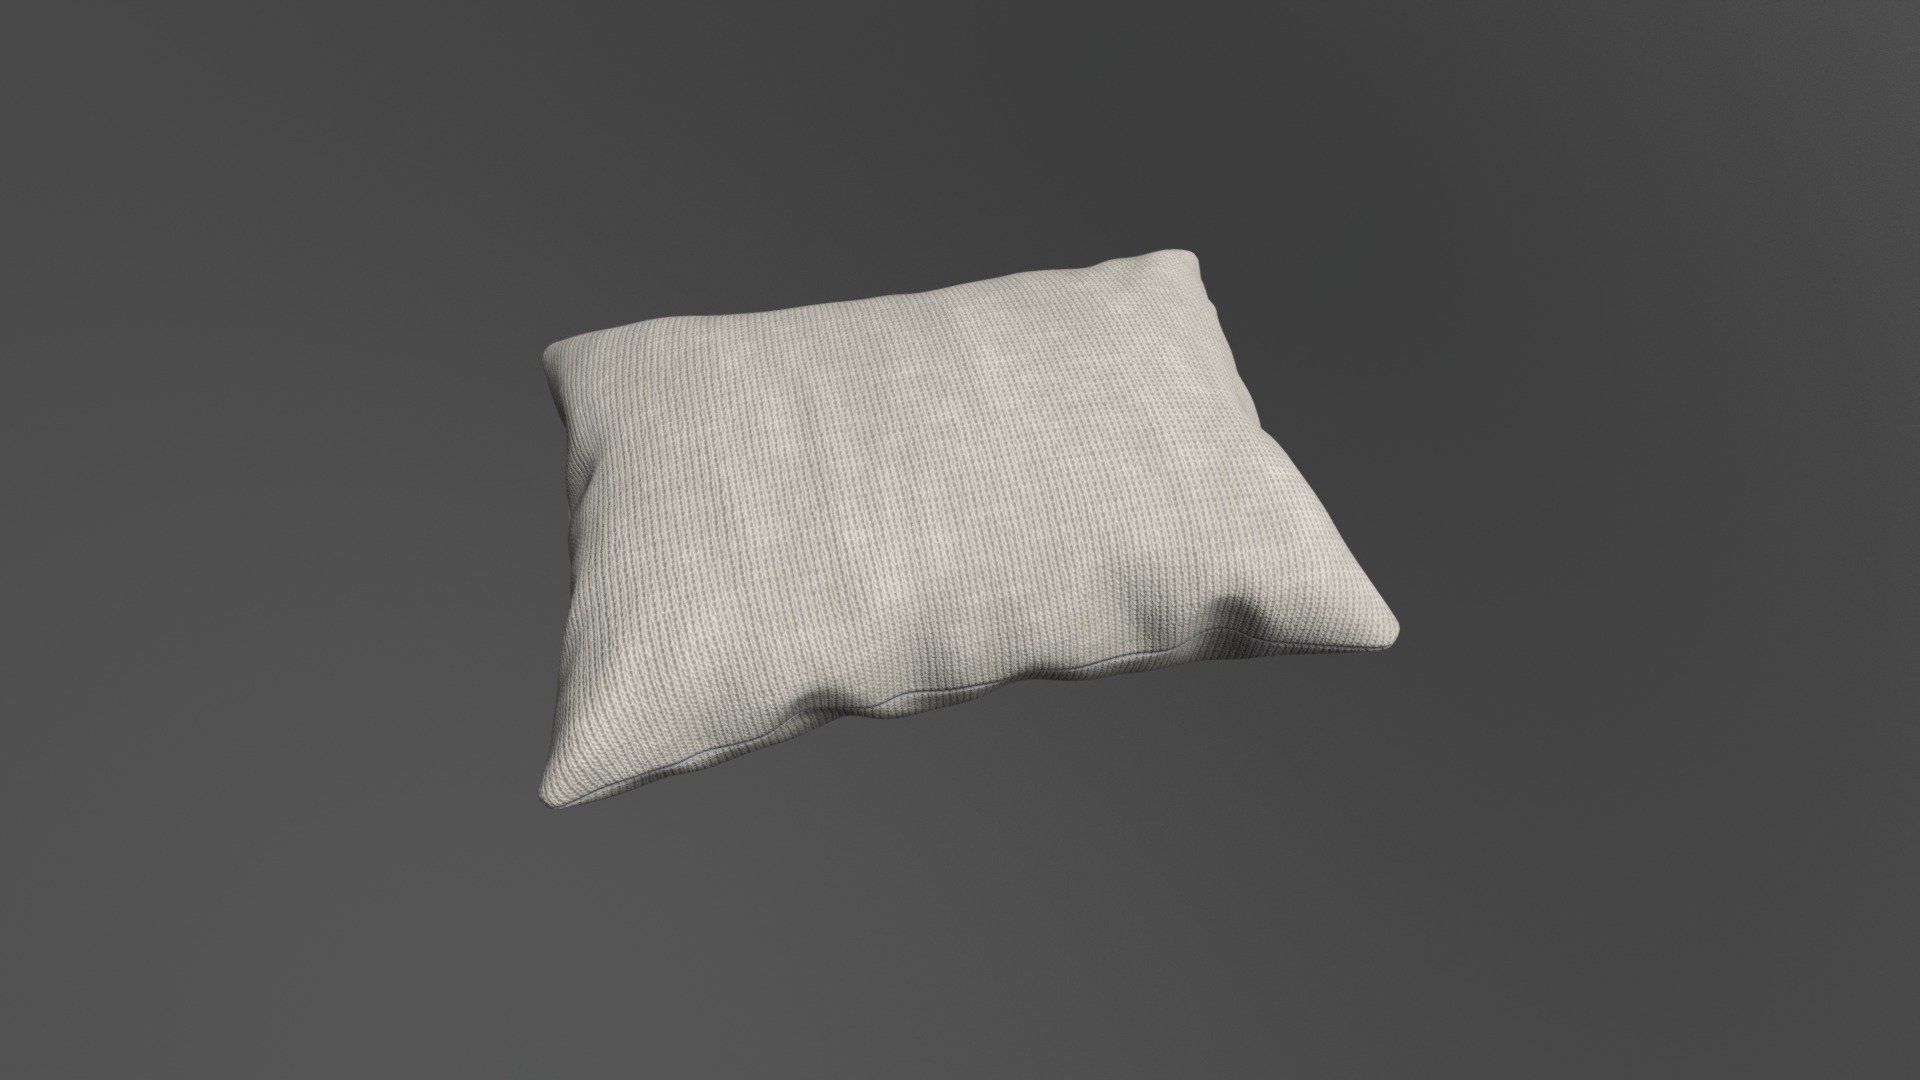 Pillow created in 3ds max. I started with a box. The box length/width = 60x45 with 60/40 segments. i used the &ldquo;cloth